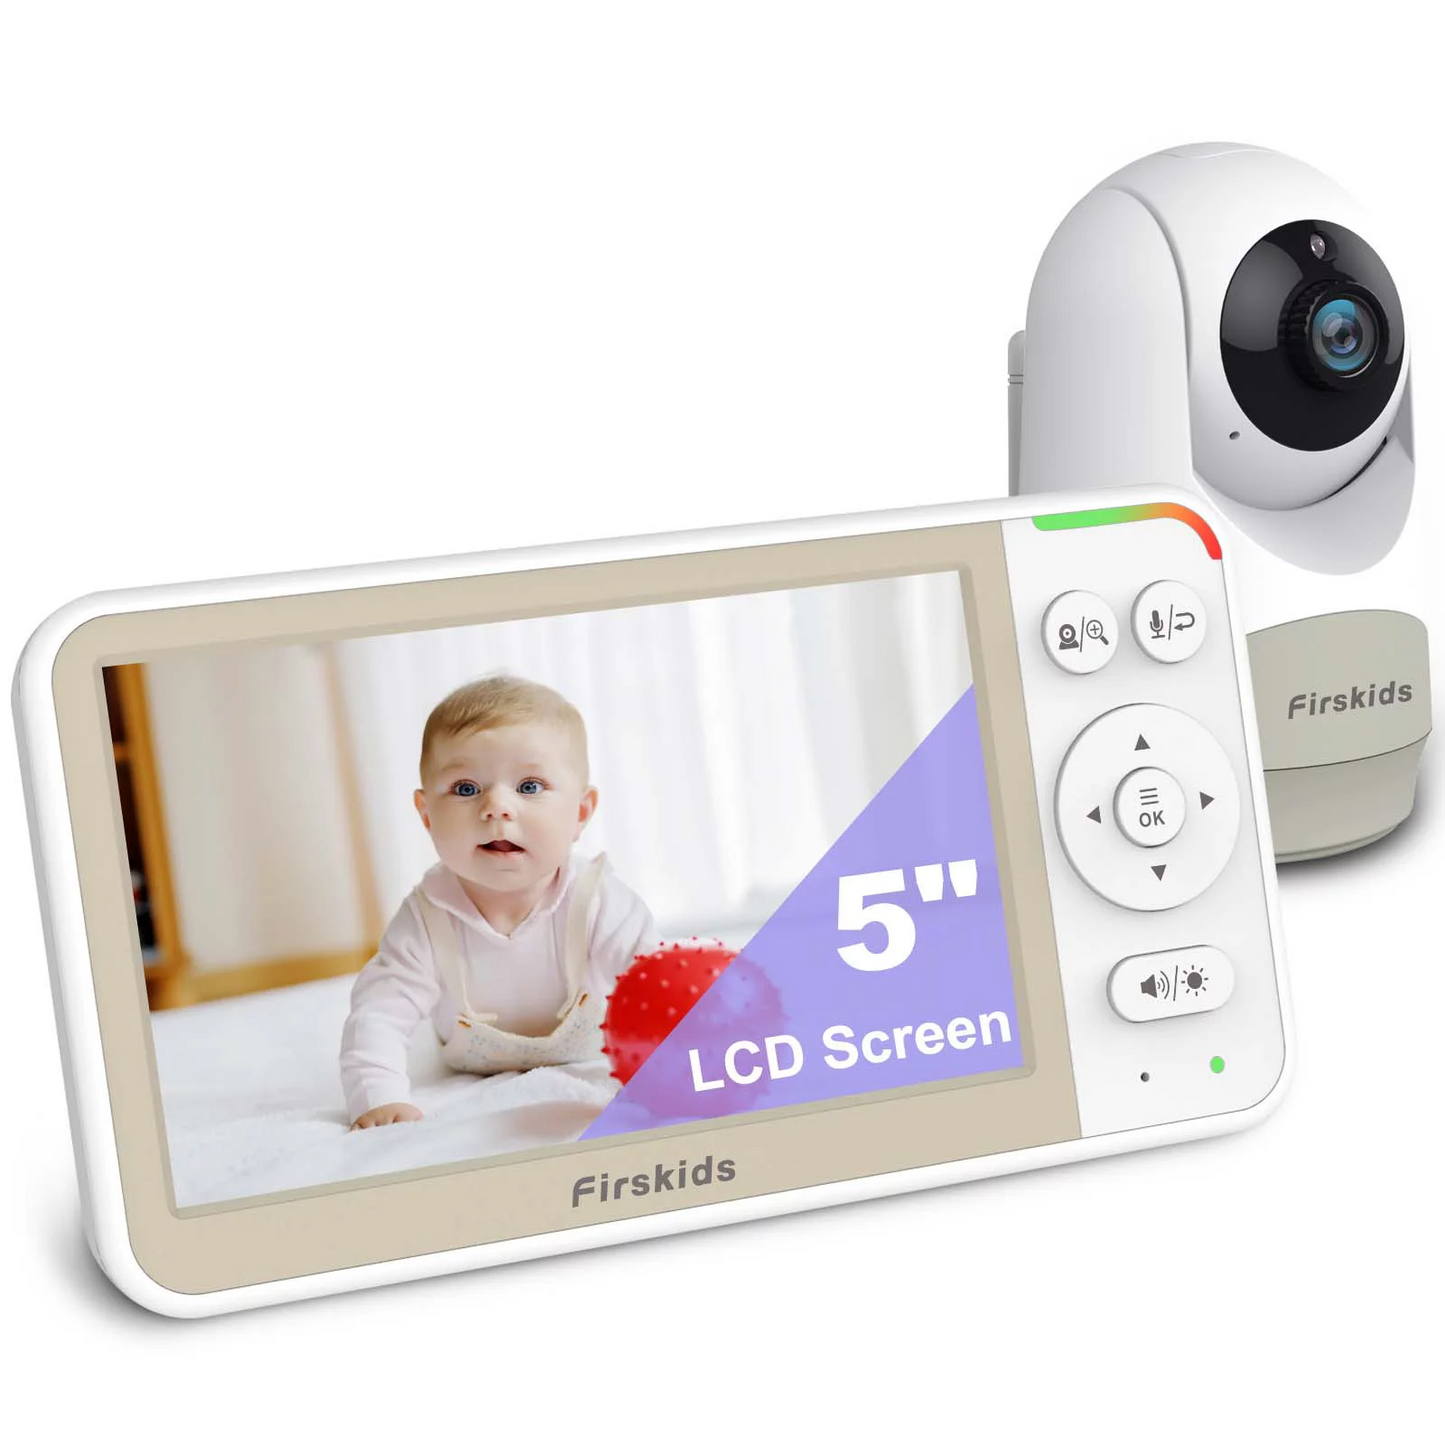  HelloBaby Monitor with Camera and Audio, 5'' Screen